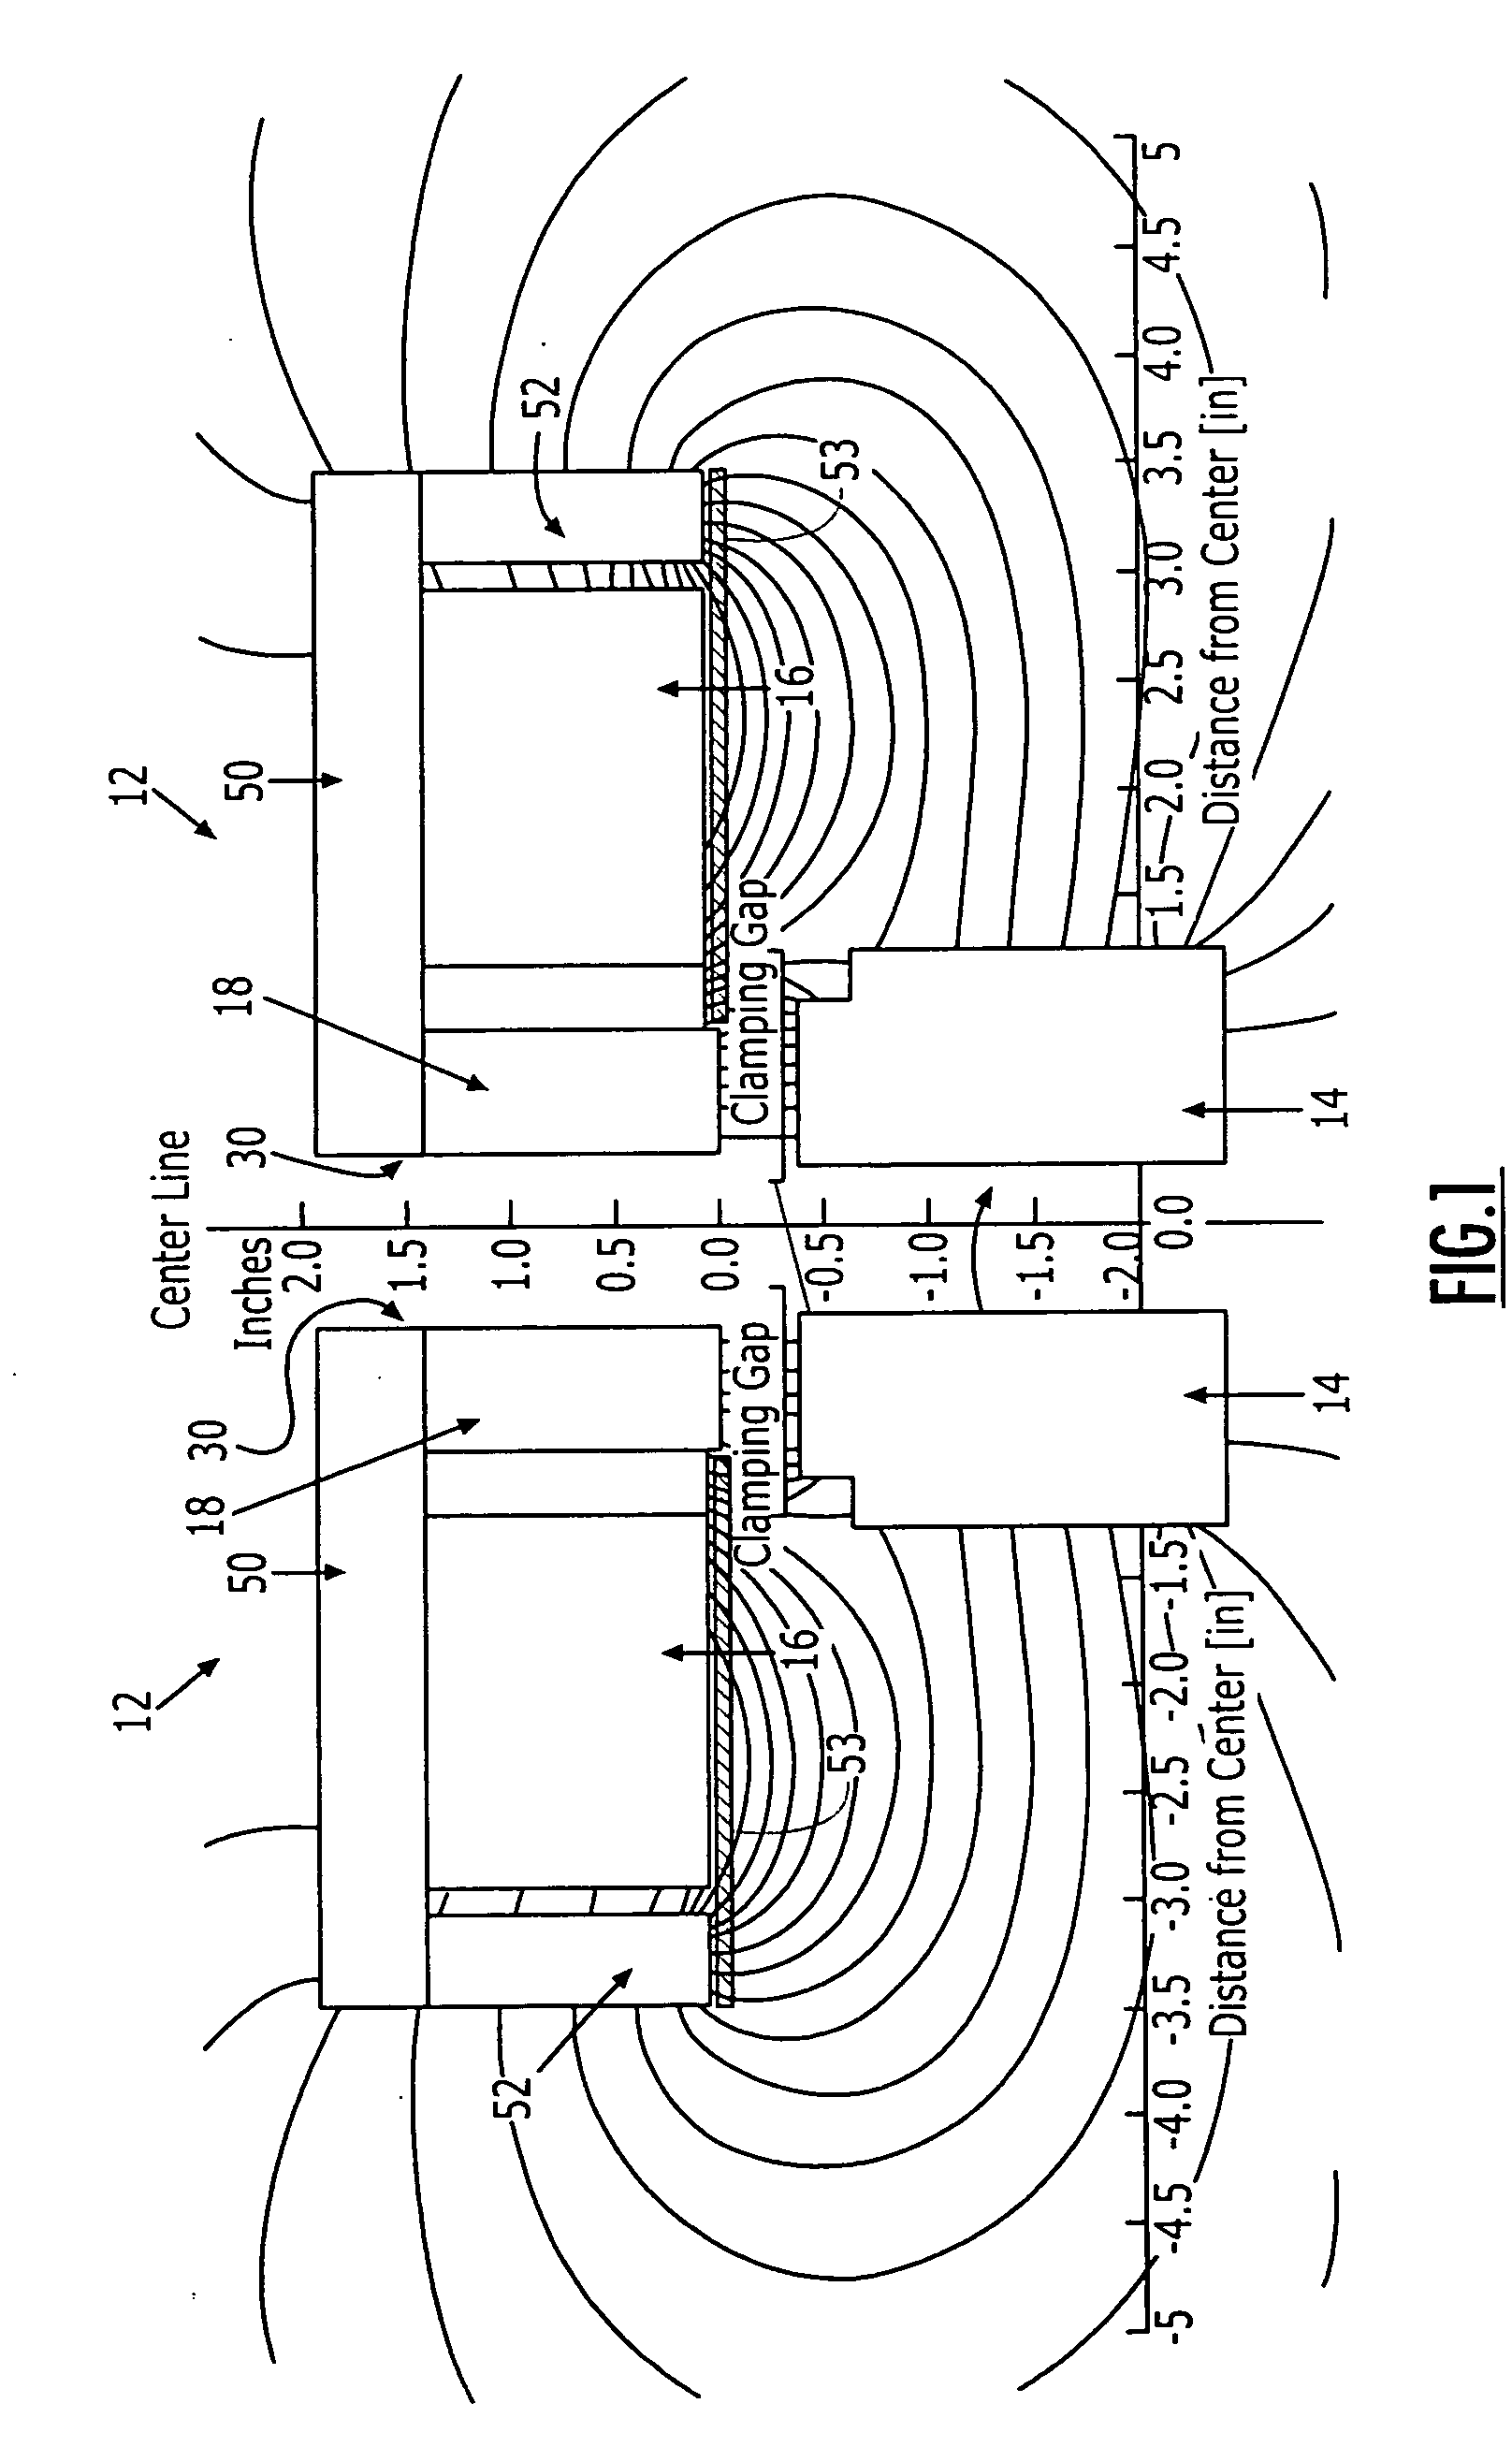 Method for fabricating an electromagnet